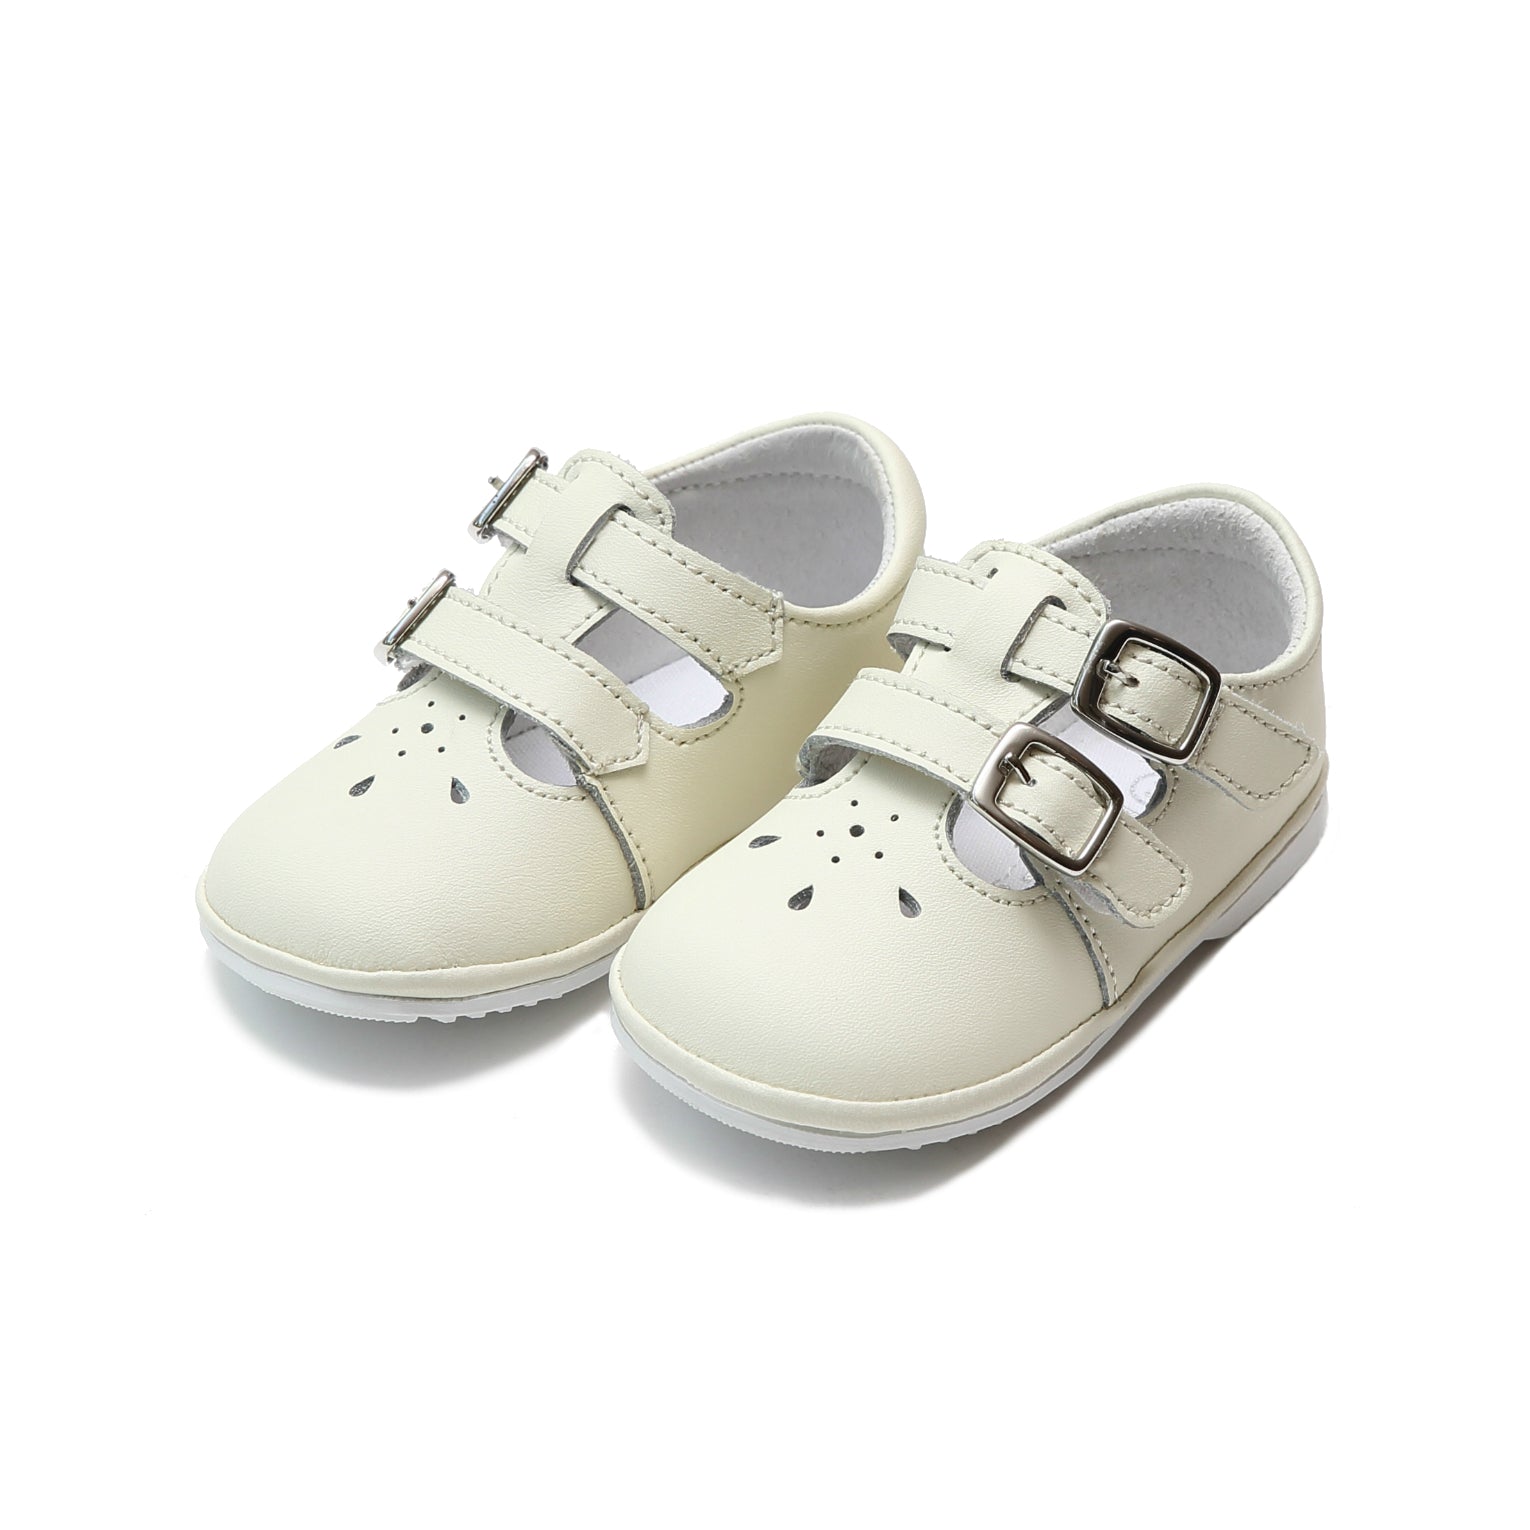 baby buckle shoes